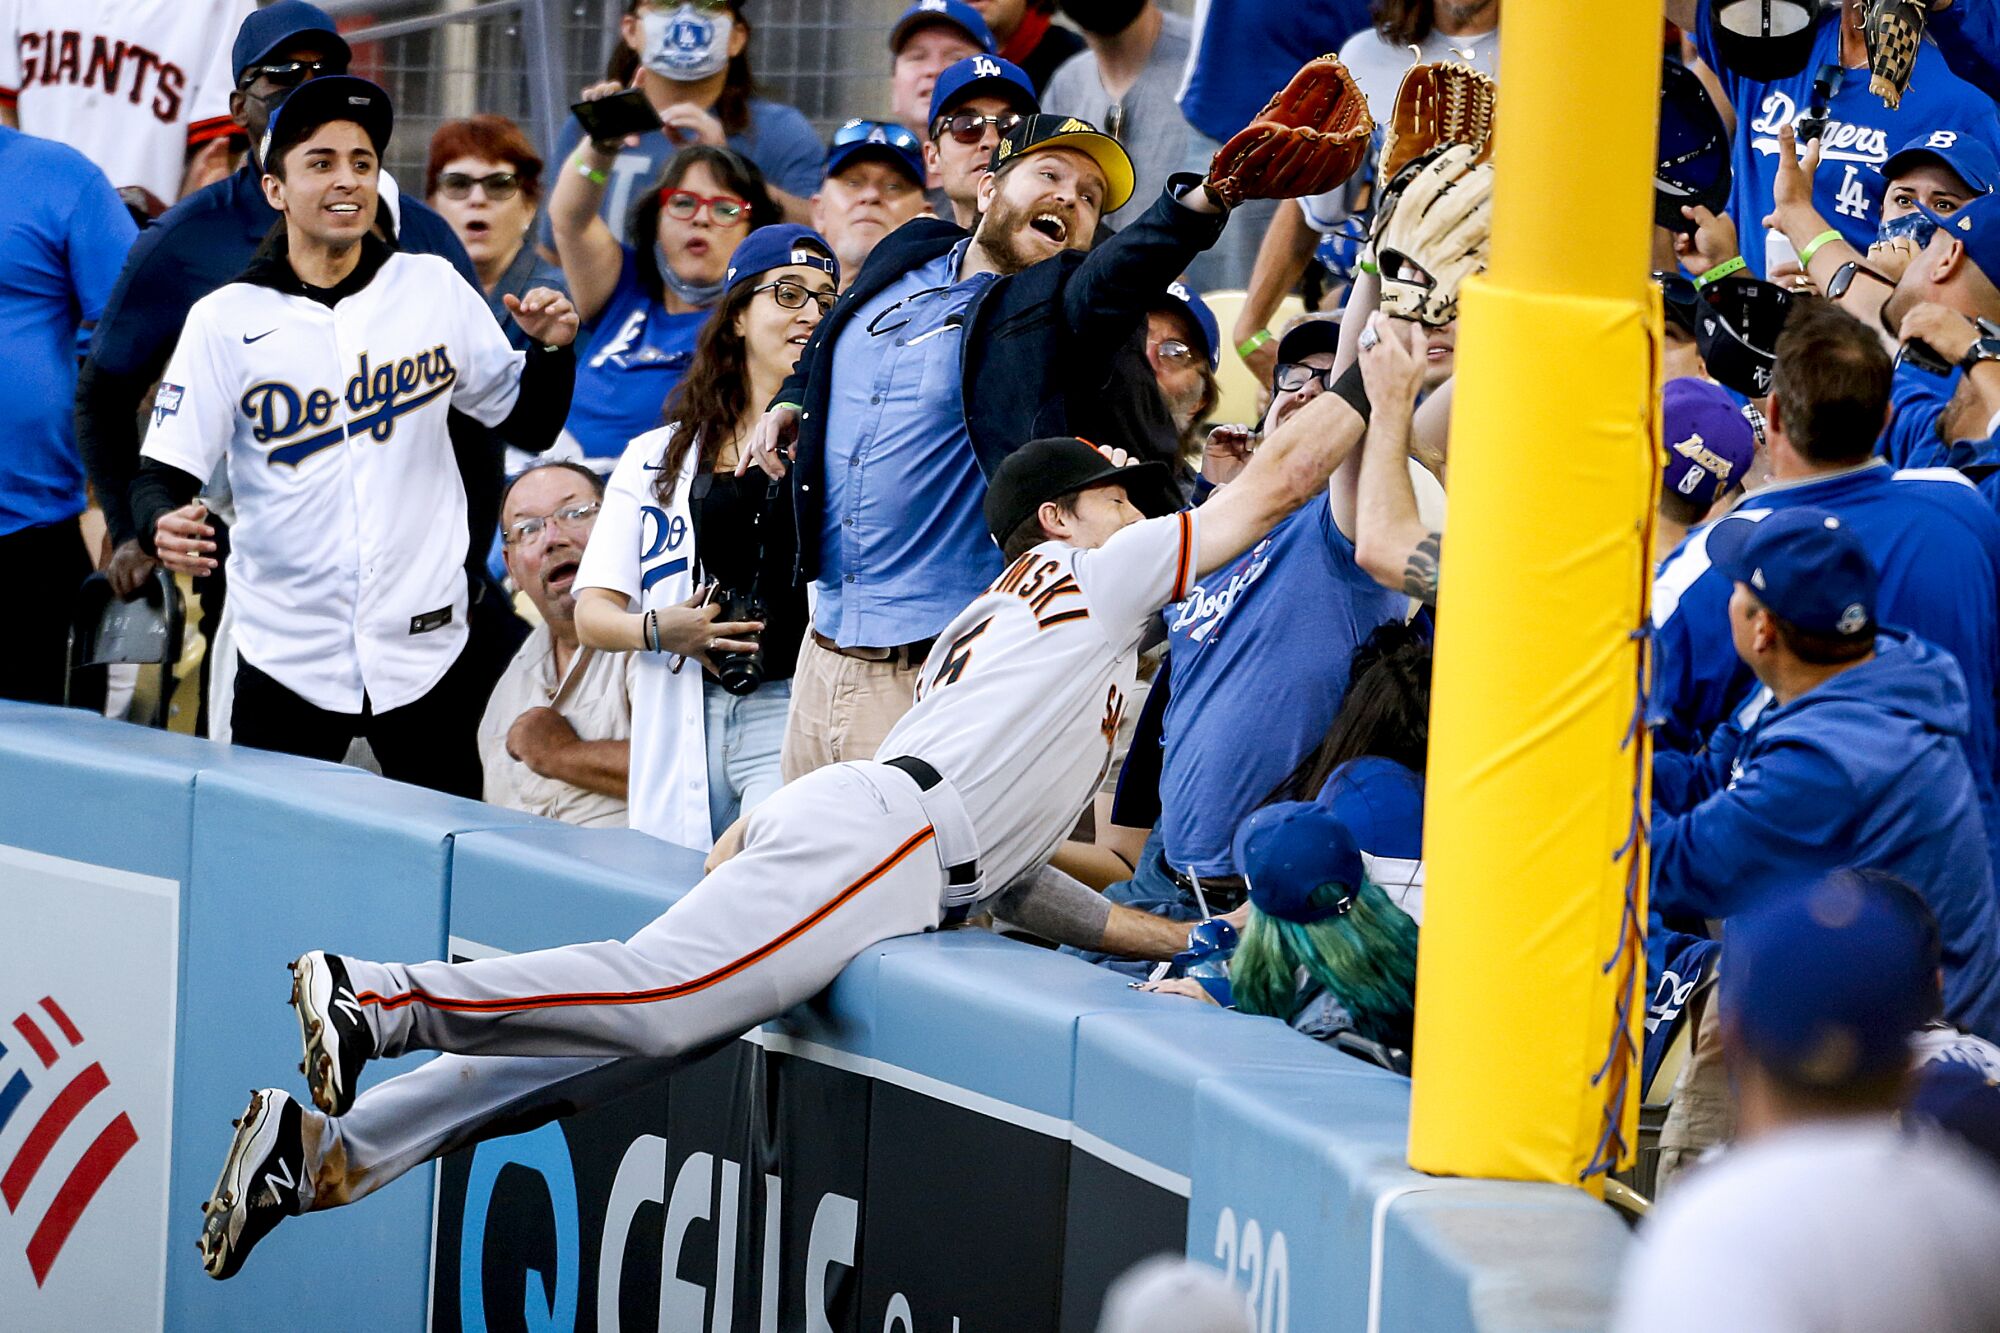 A baseball player dives into the stands after a ball, surrounded by fans, a couple of whom also try to catch the ball.